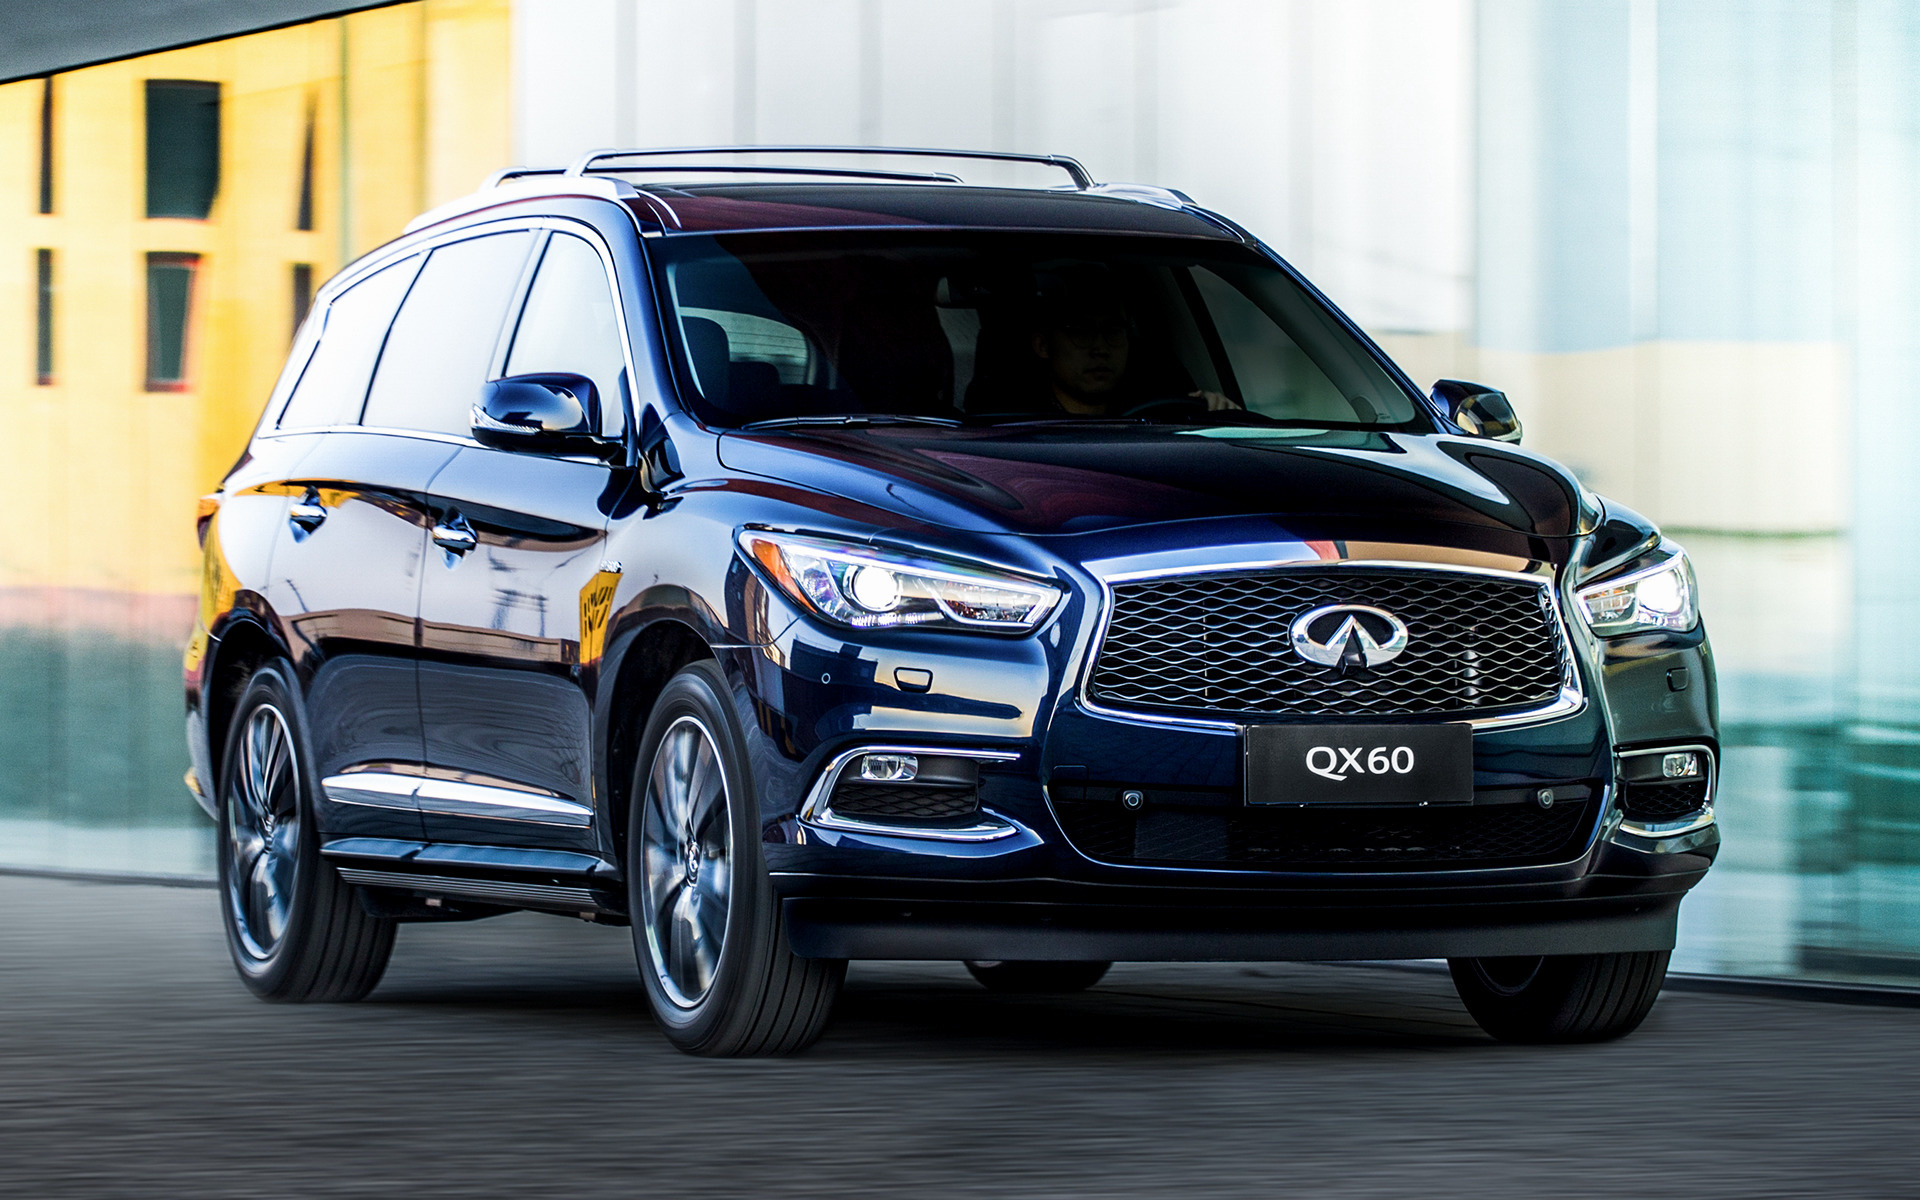 2016 Infiniti QX60 Hybrid (CN) - Wallpapers and HD Images | Car Pixel